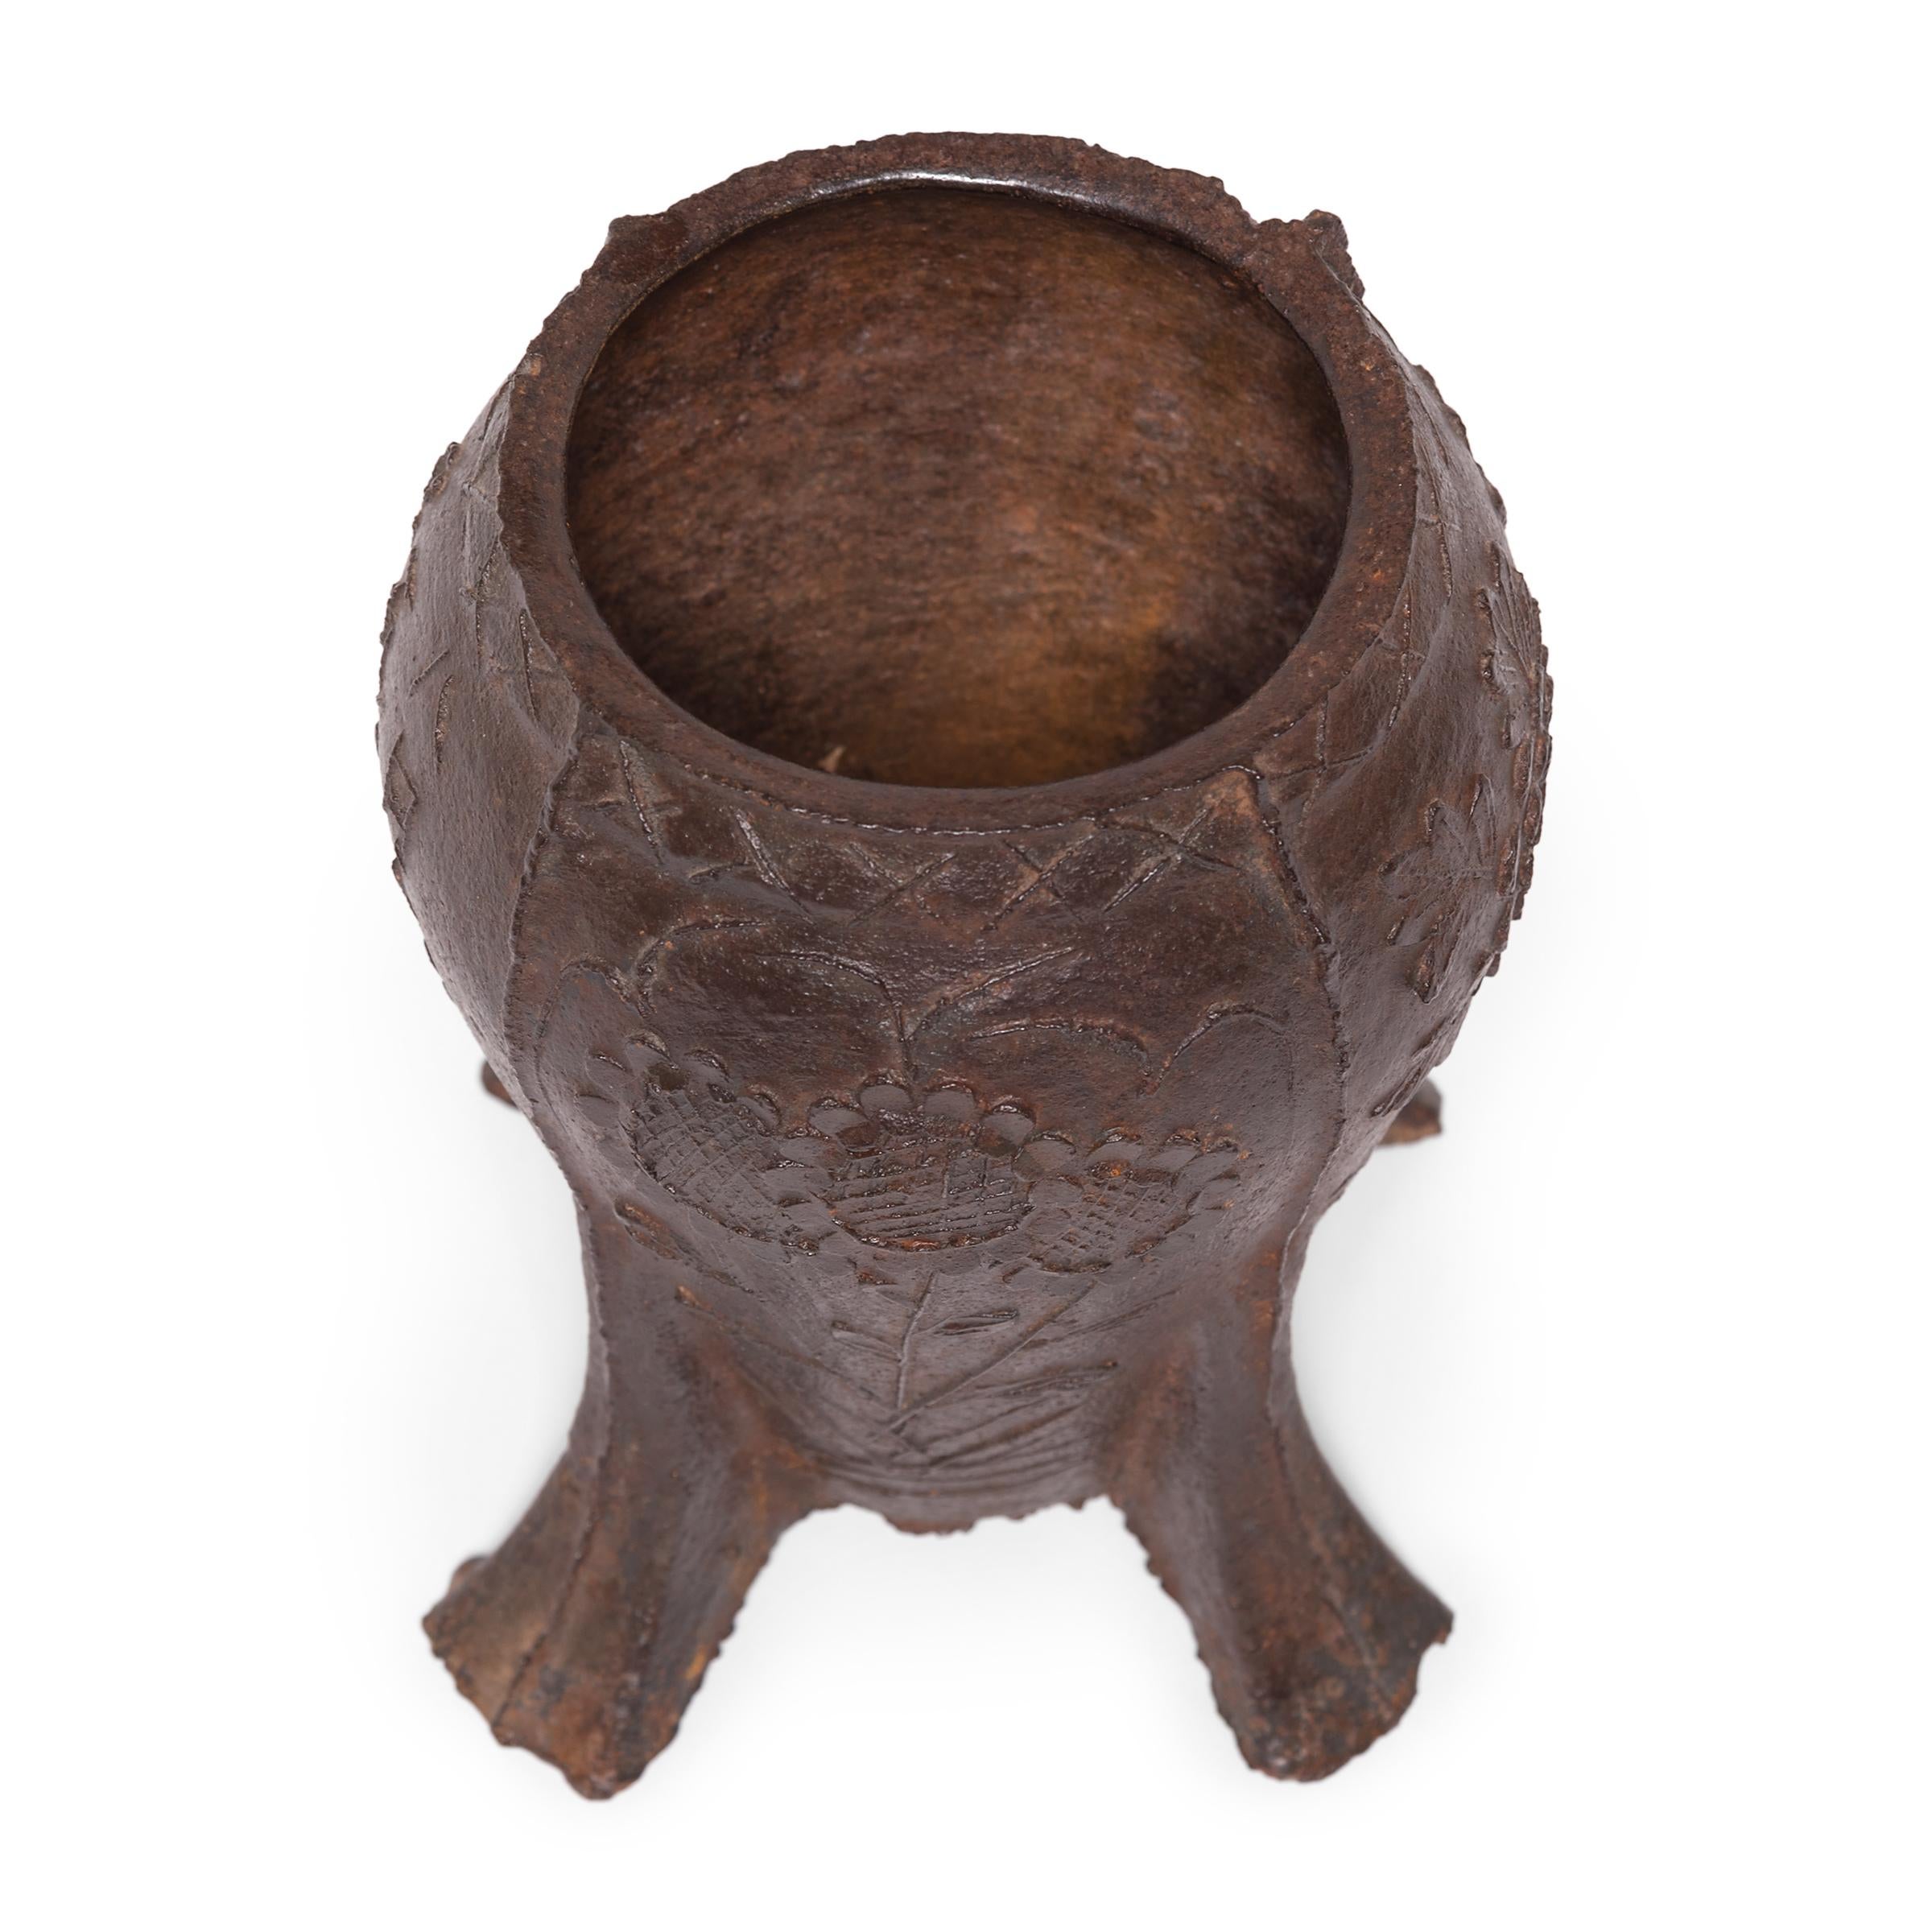 Cast in iron with a raised floral design, this vintage mortar was once used in a traditional apothecary to create herbal medicines. Beautifully aged with a rich patina, the footed mortar is perfect as a petite planter or home accent.